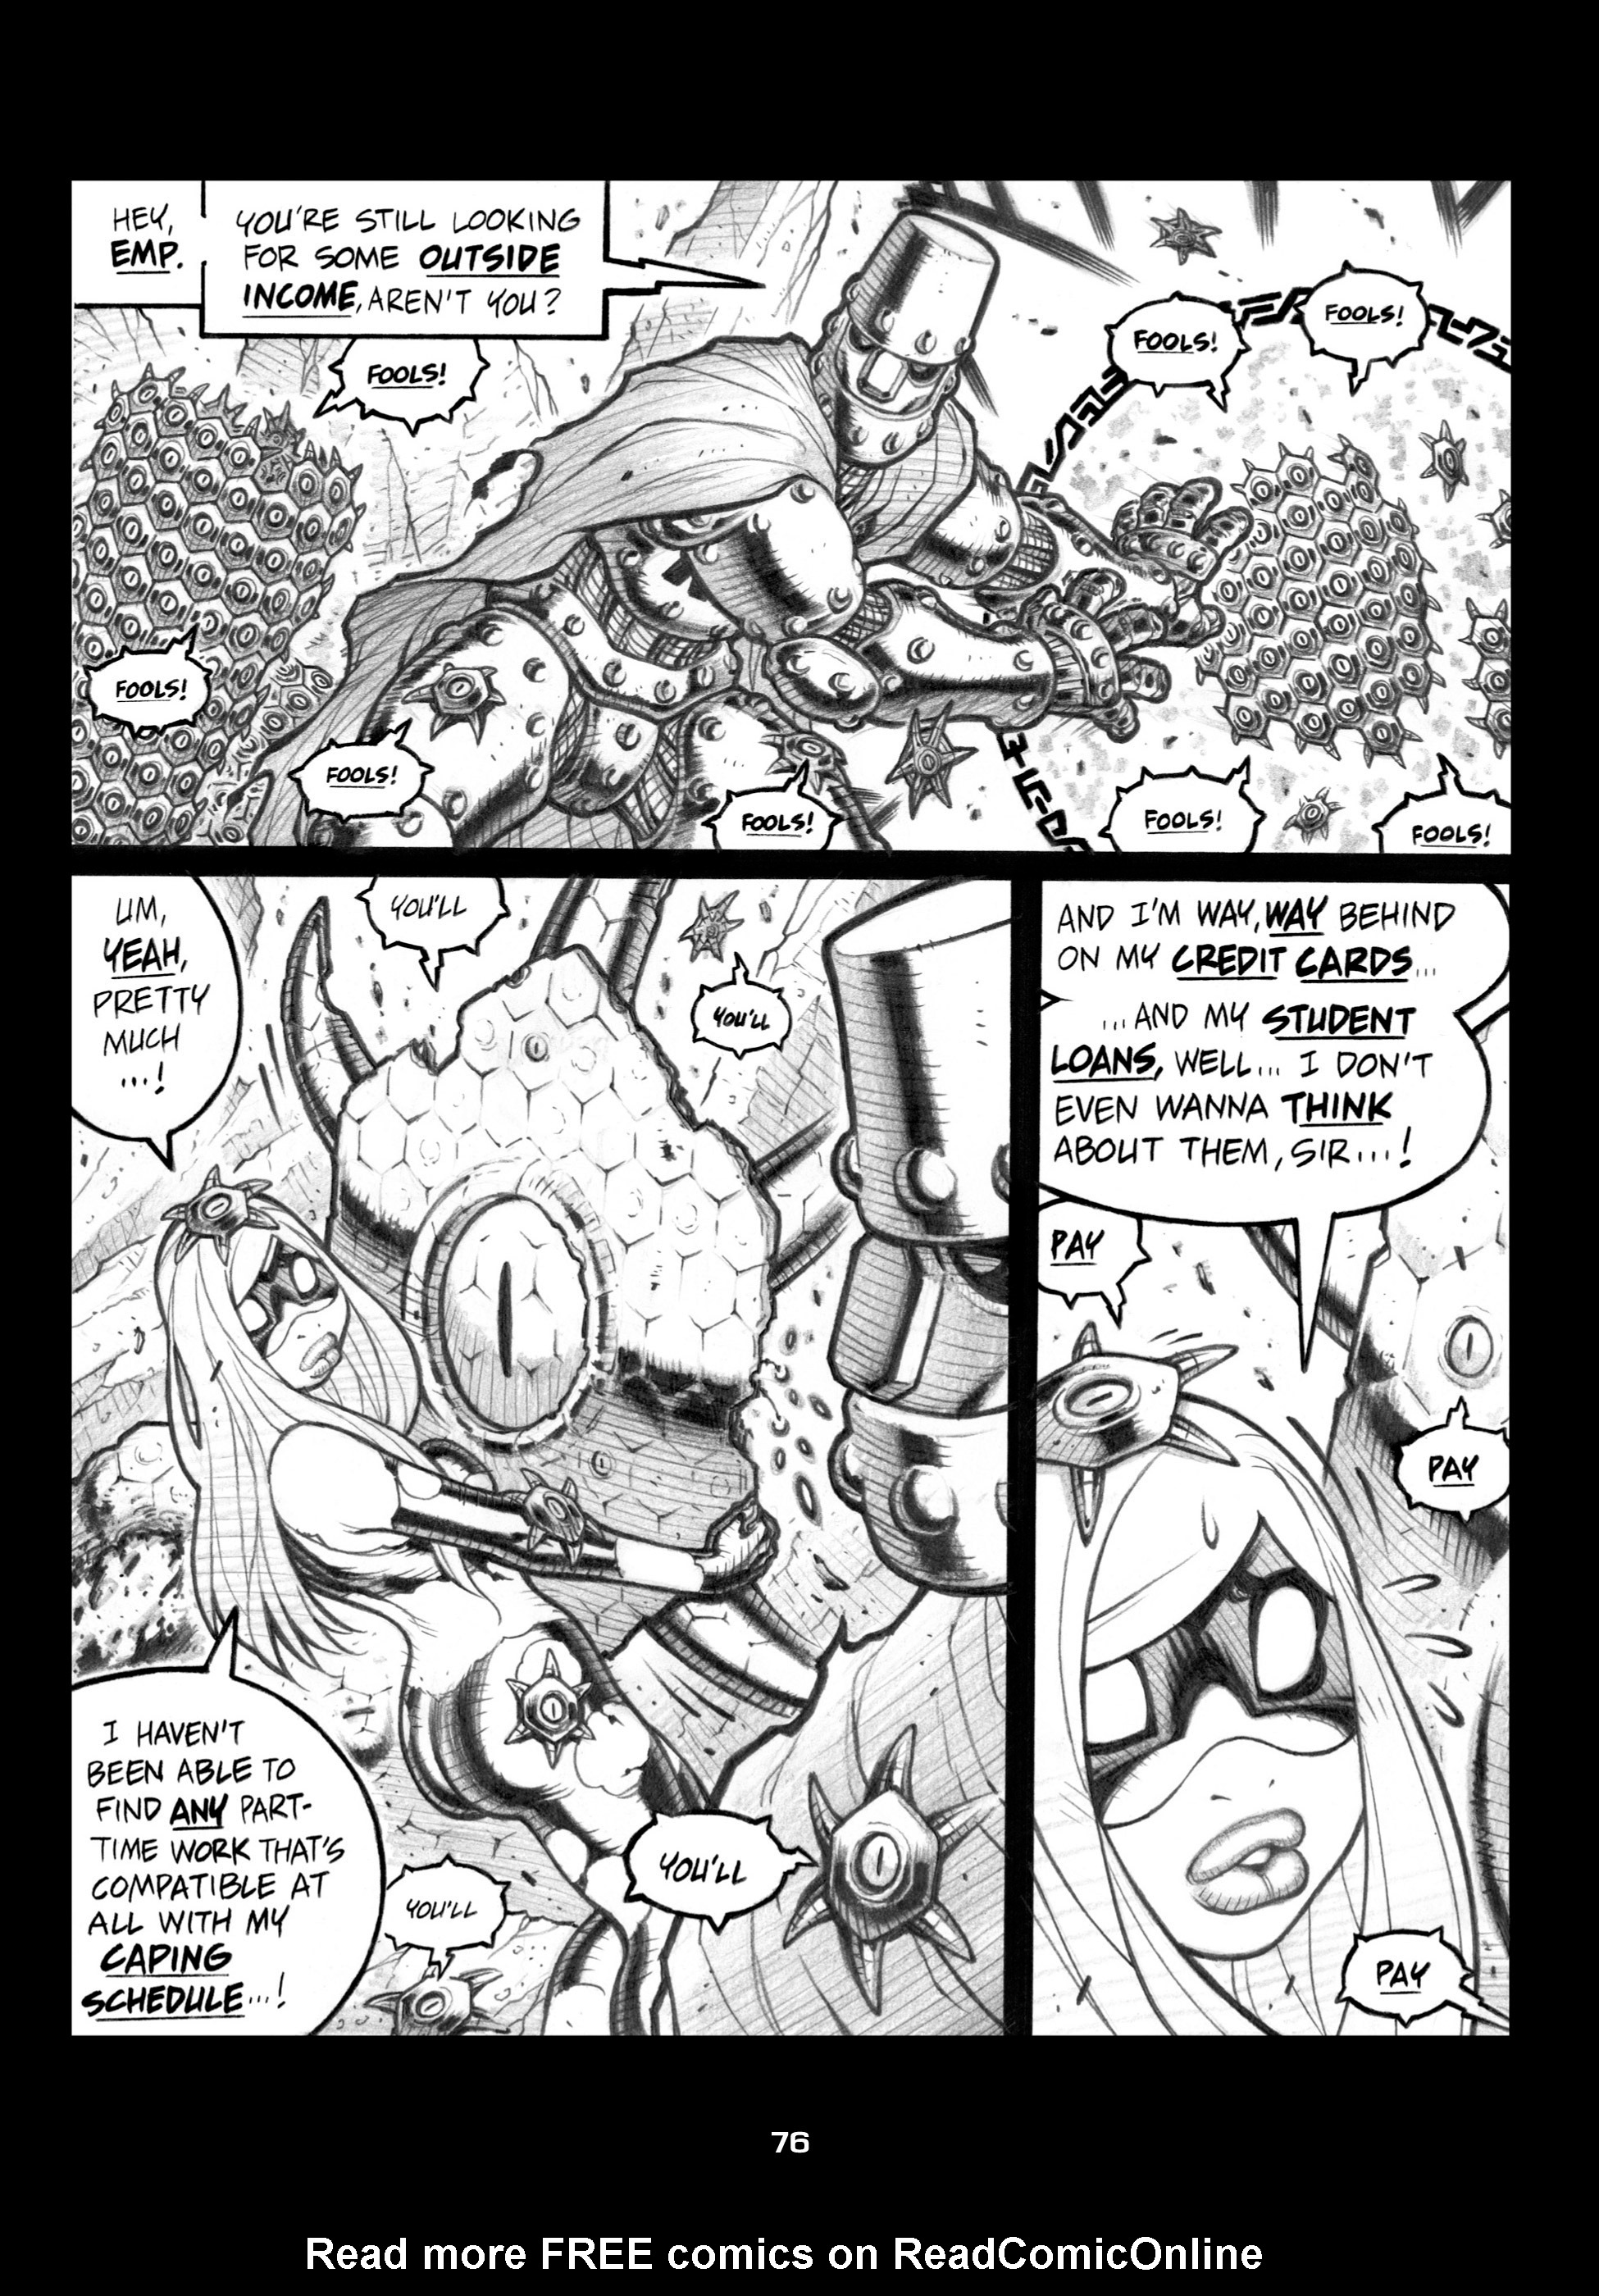 Read online Empowered comic -  Issue #9 - 76